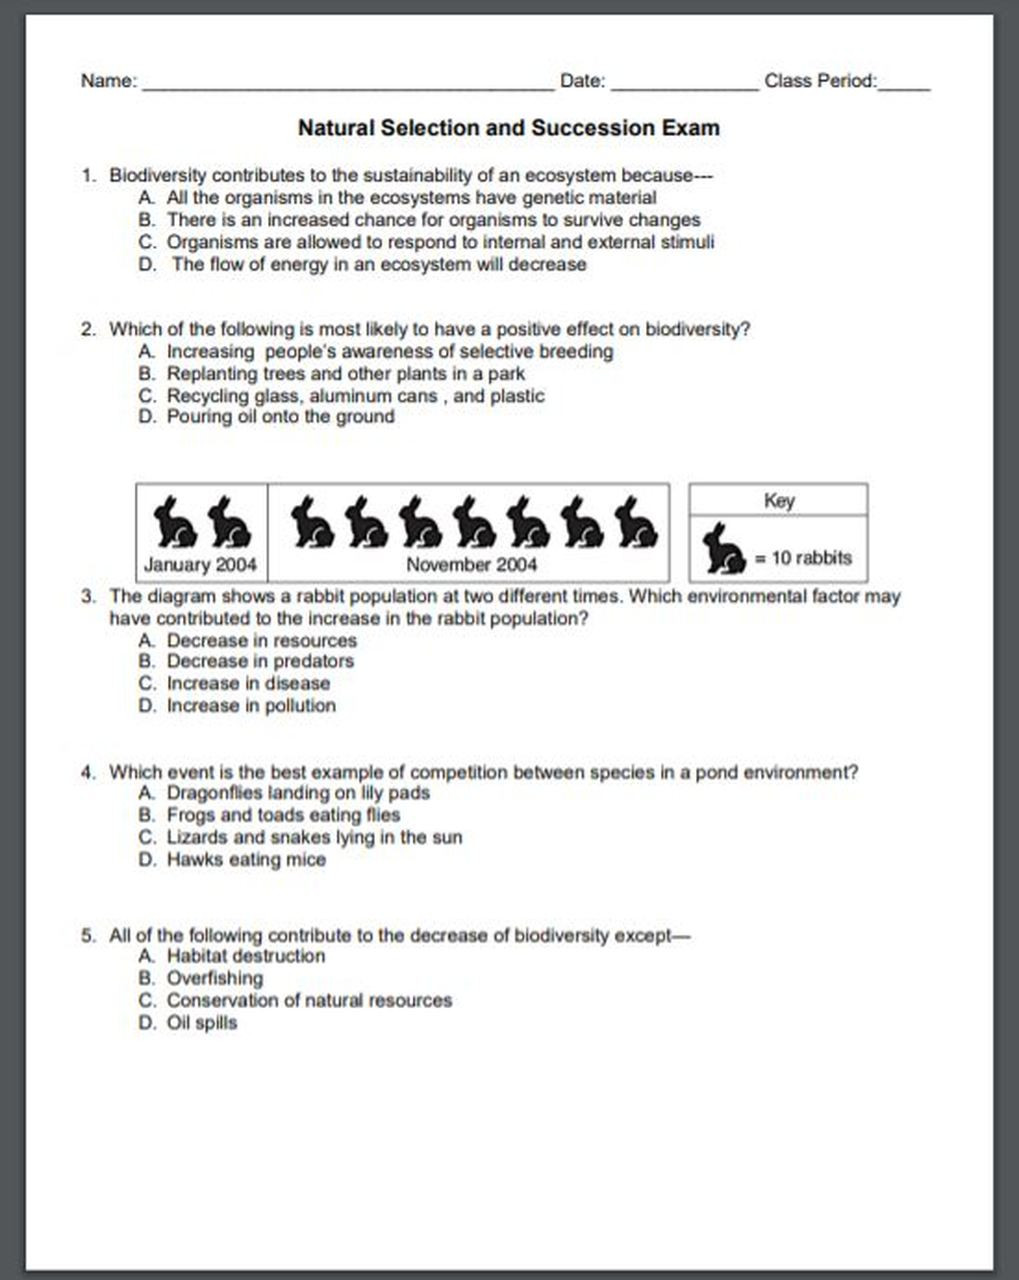 Ecological Succession Worksheet Answers Natural Selection and Succession Exam